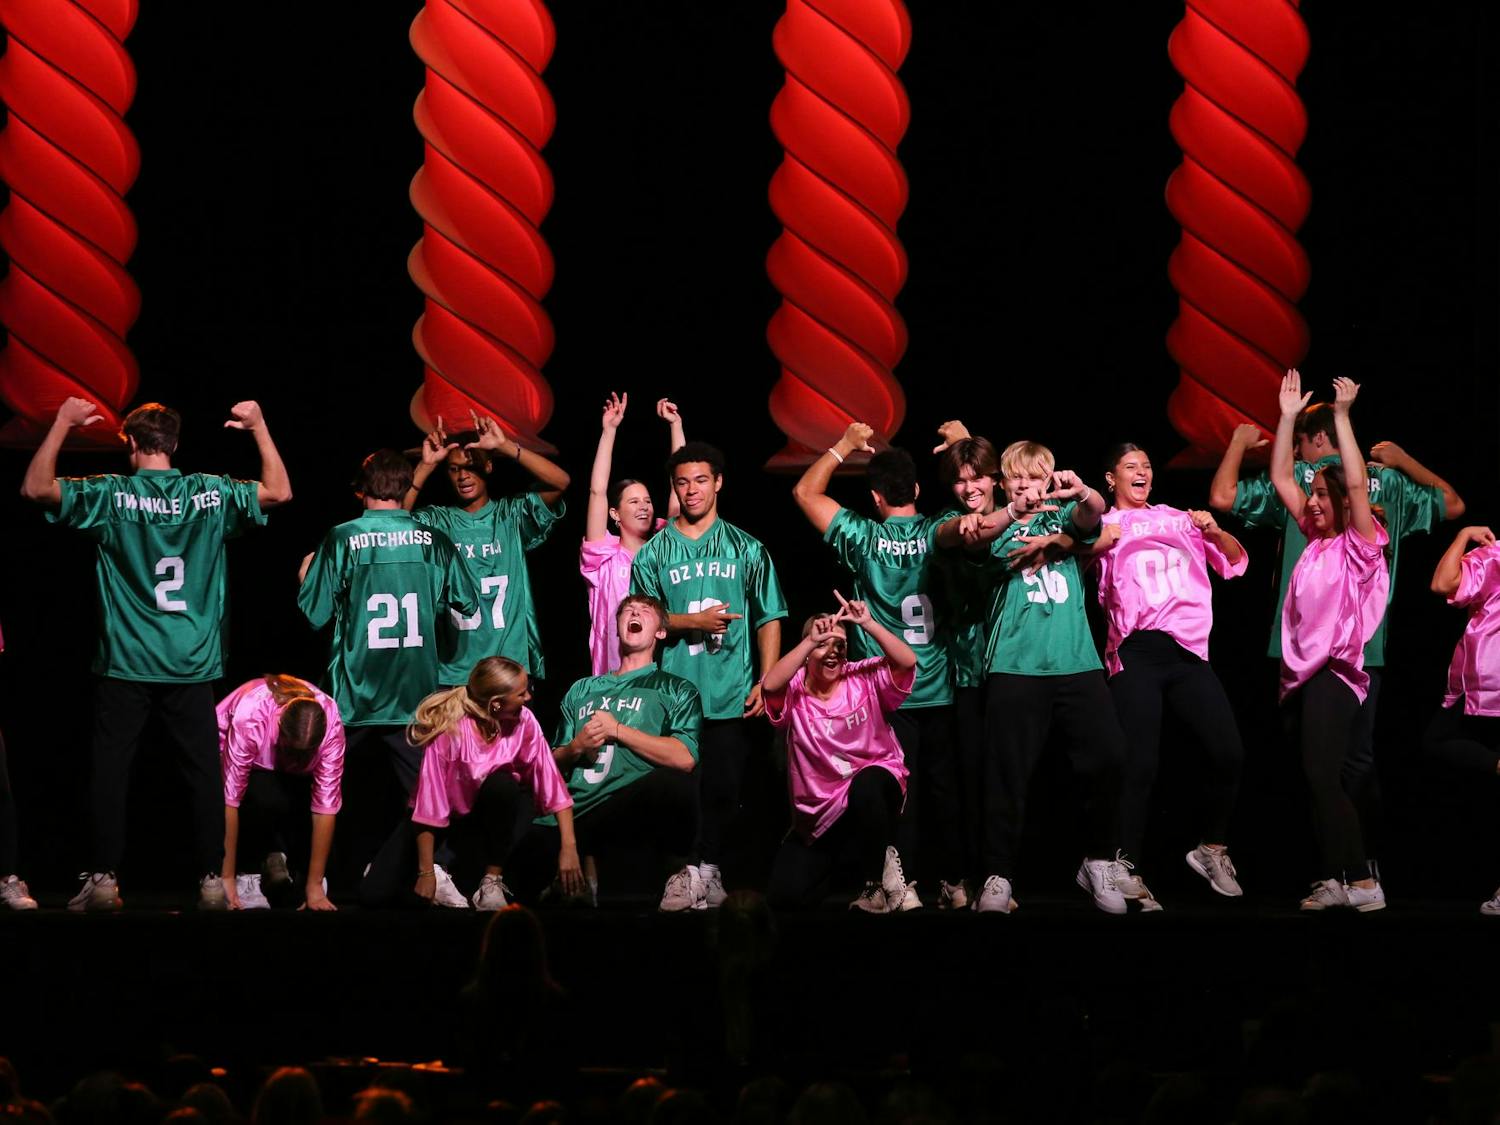 Sisters of Delta Zeta and brothers of Phi Gamma Delta perform together during Spurs and Struts on Oct. 11, 2023. The two organizations sported opposing green and pink jerseys for their performance at the Columbia Metropolitan Convention Center.